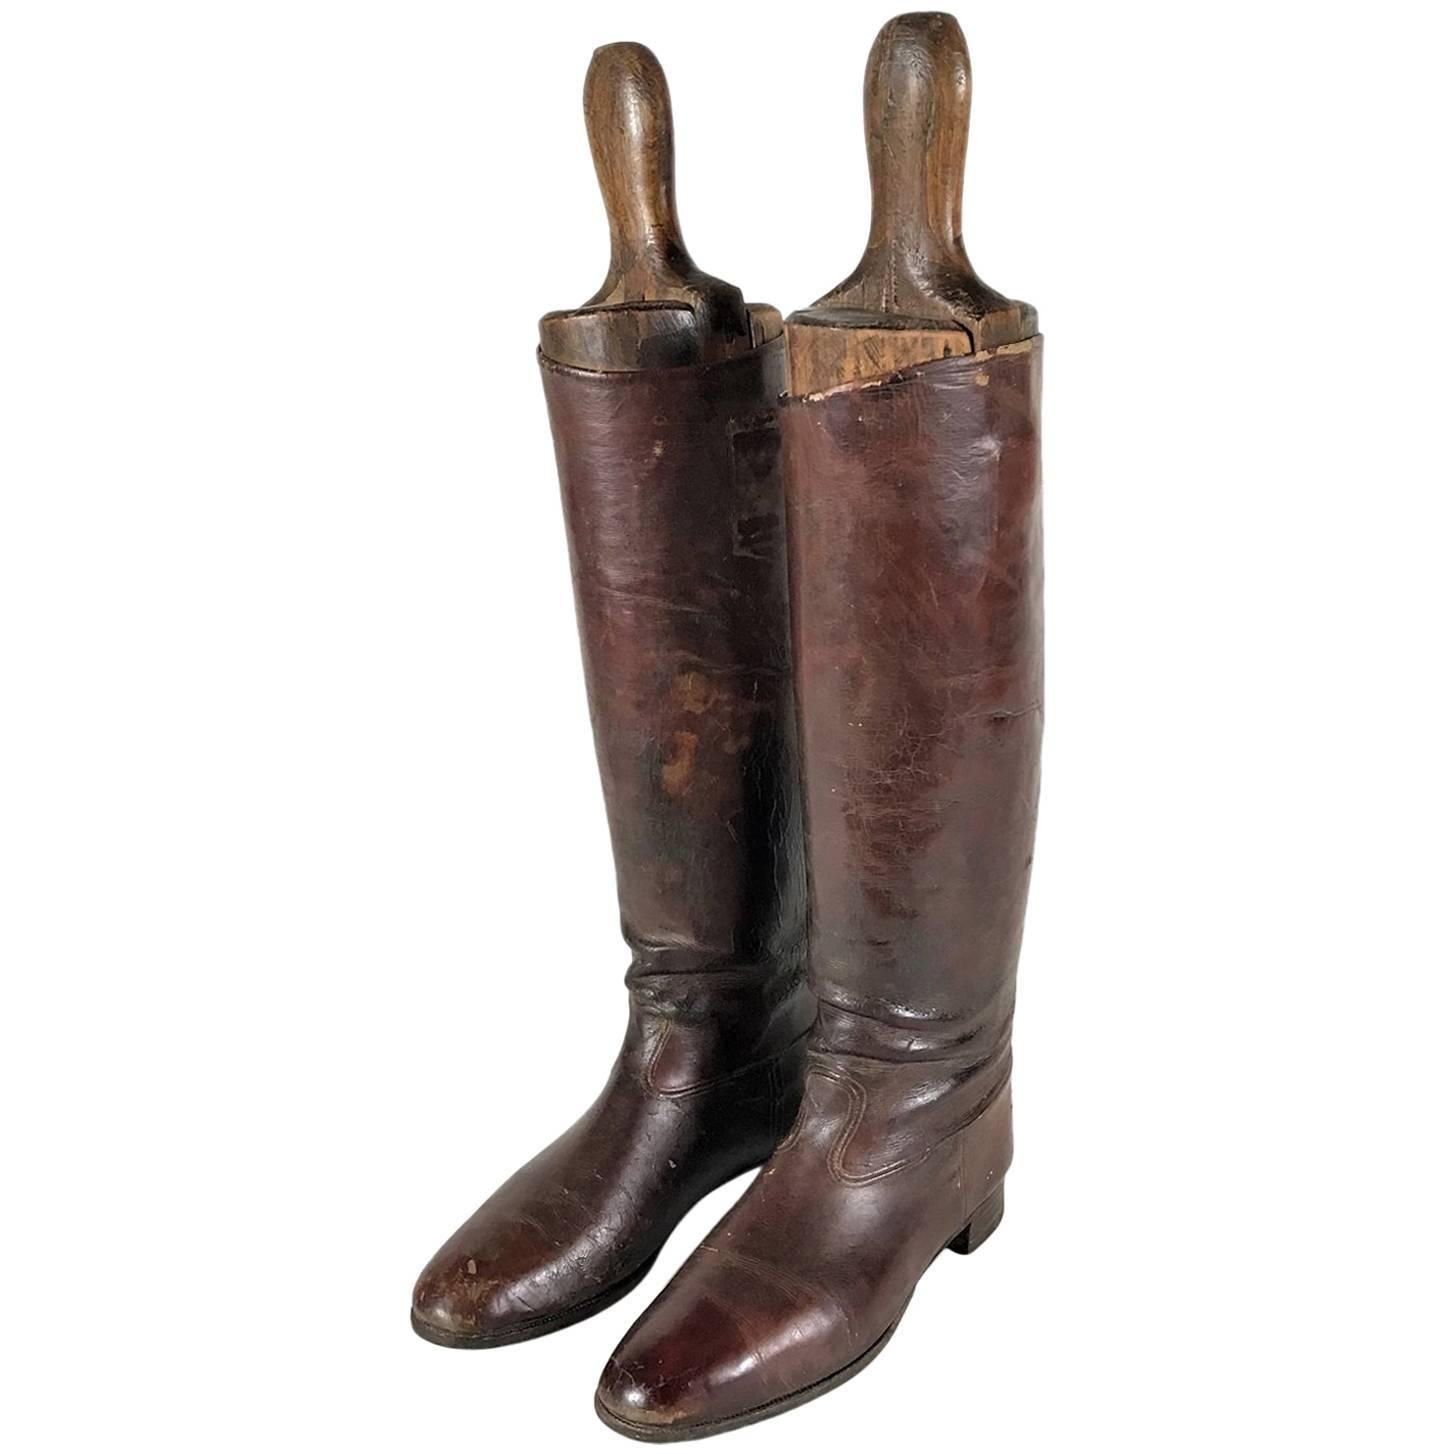 Antique Brown Leather Riding Boots with Trees, 1890s Austria